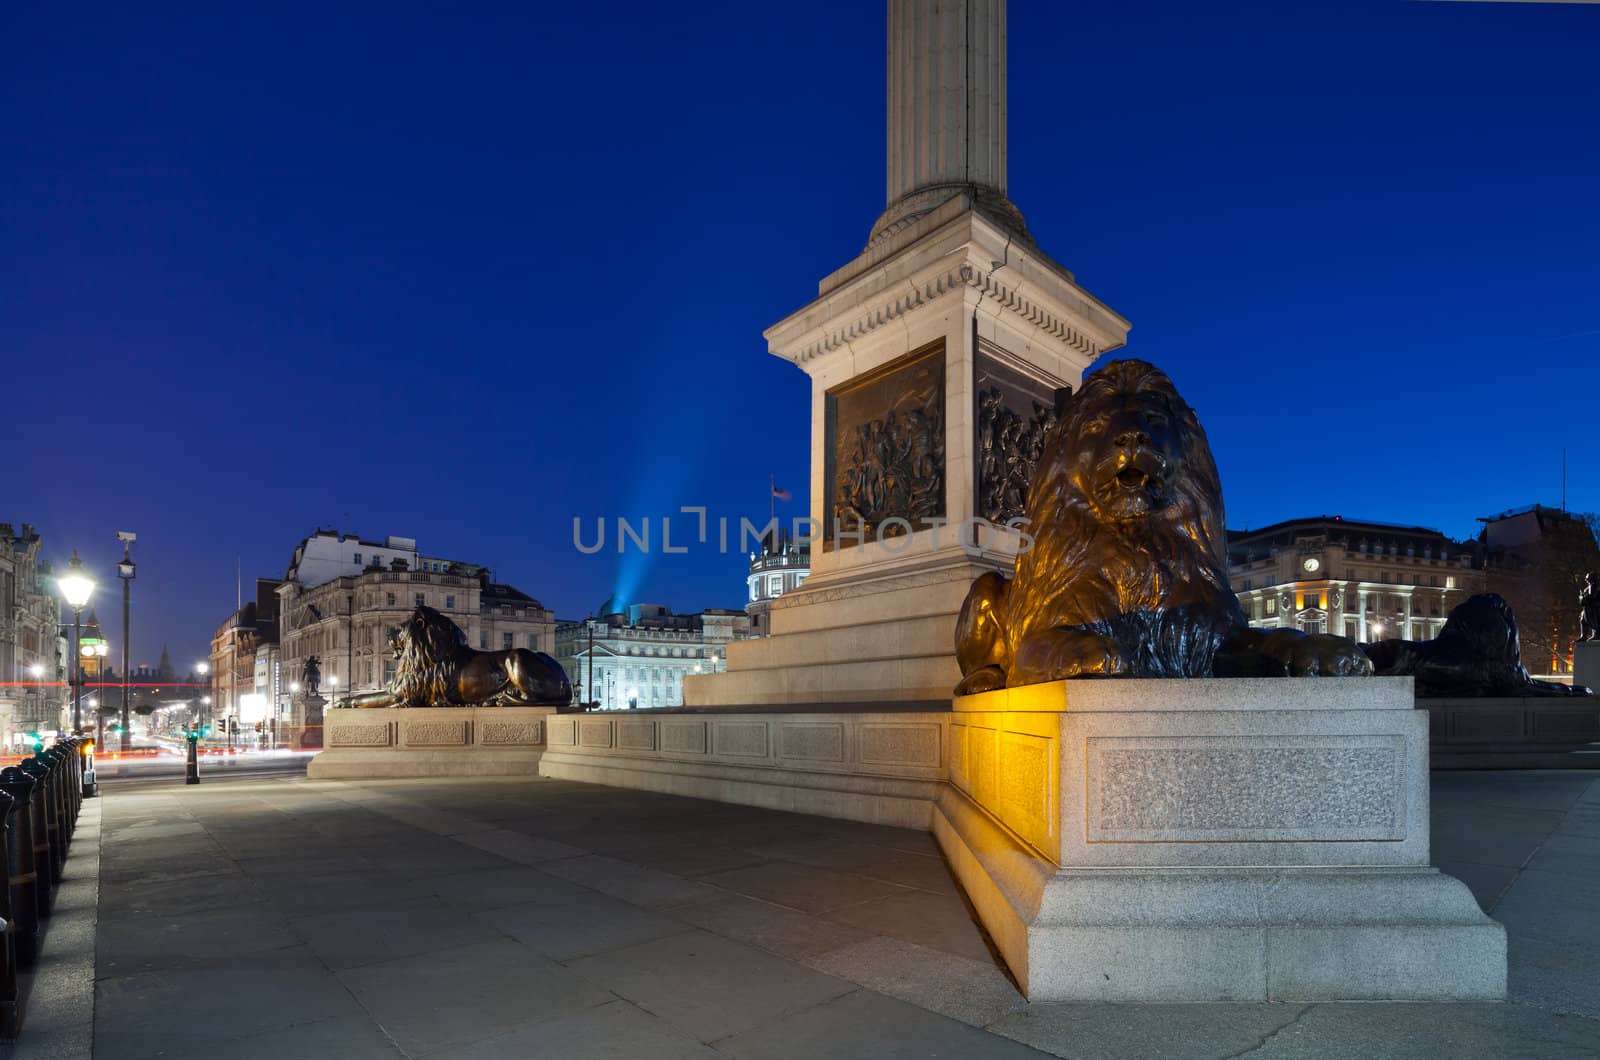 Pedestal Nelson's Column in Trafalgar Square with four lions lying. Shooting in low light. In the background - Big Ben. Cityscape  shot with tilt-shift lens maintaining verticals